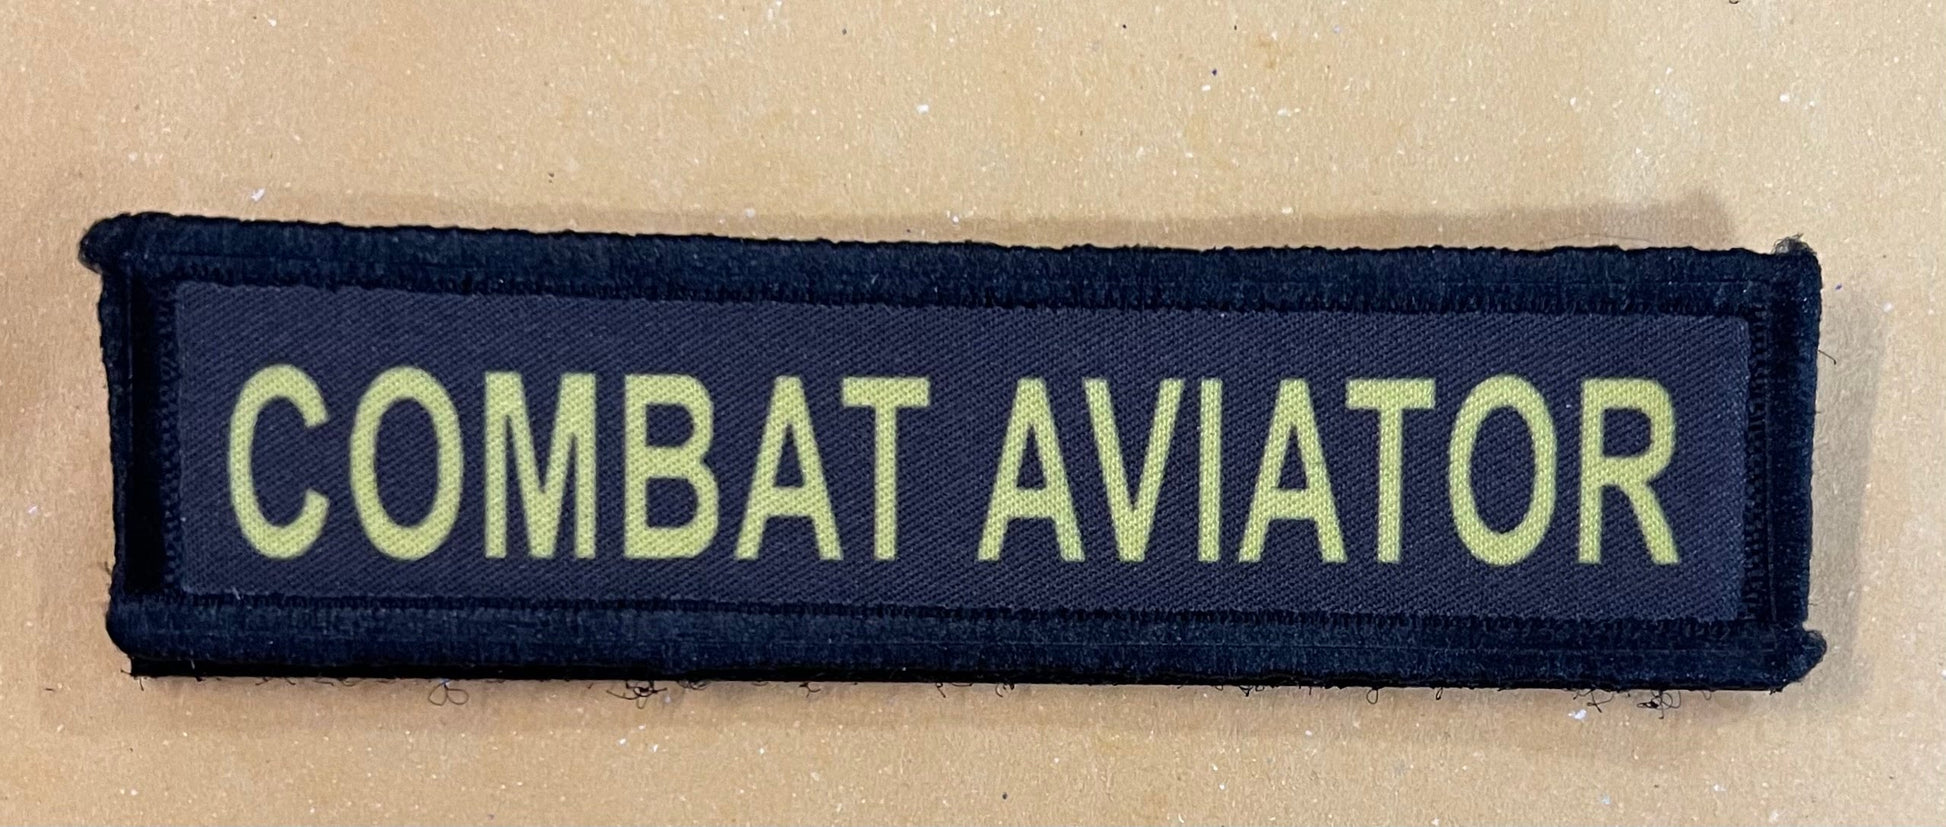 Combat Aviator Morale Patch Morale Patches Redheaded T Shirts 